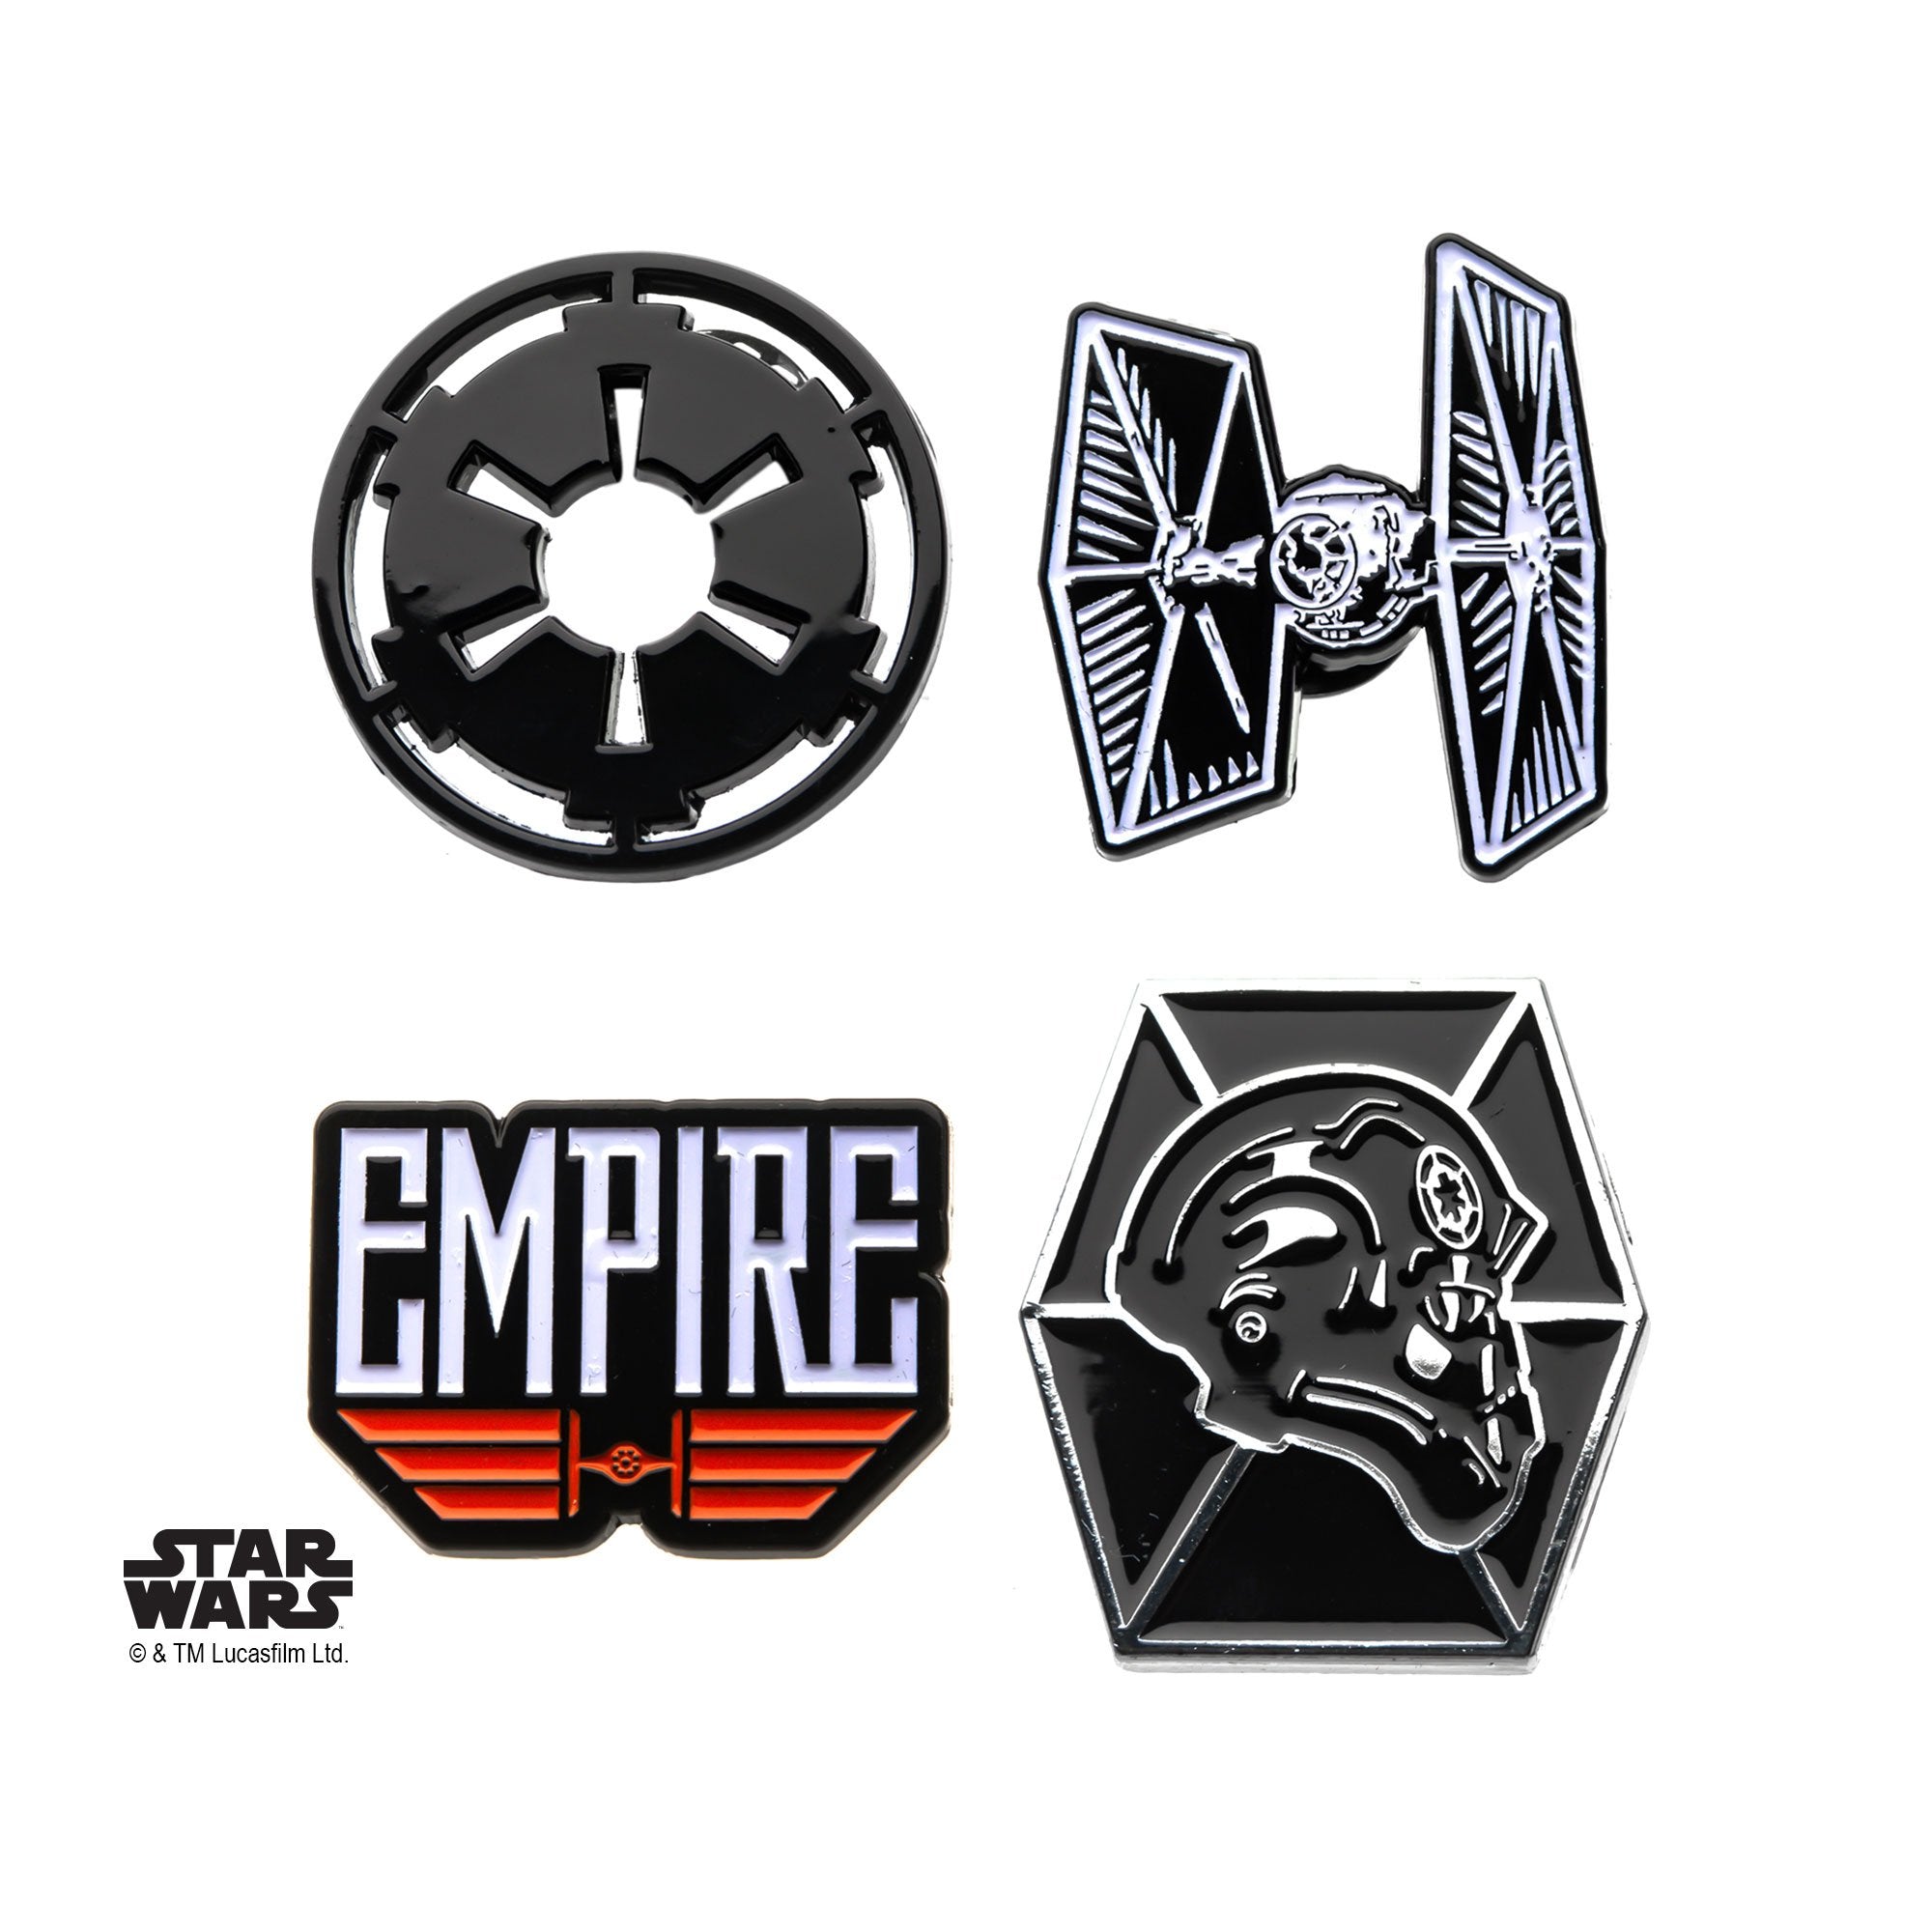 Star Wars Imperial Galactic Empire and Tie Fighter Enamel Lapel Pin Set